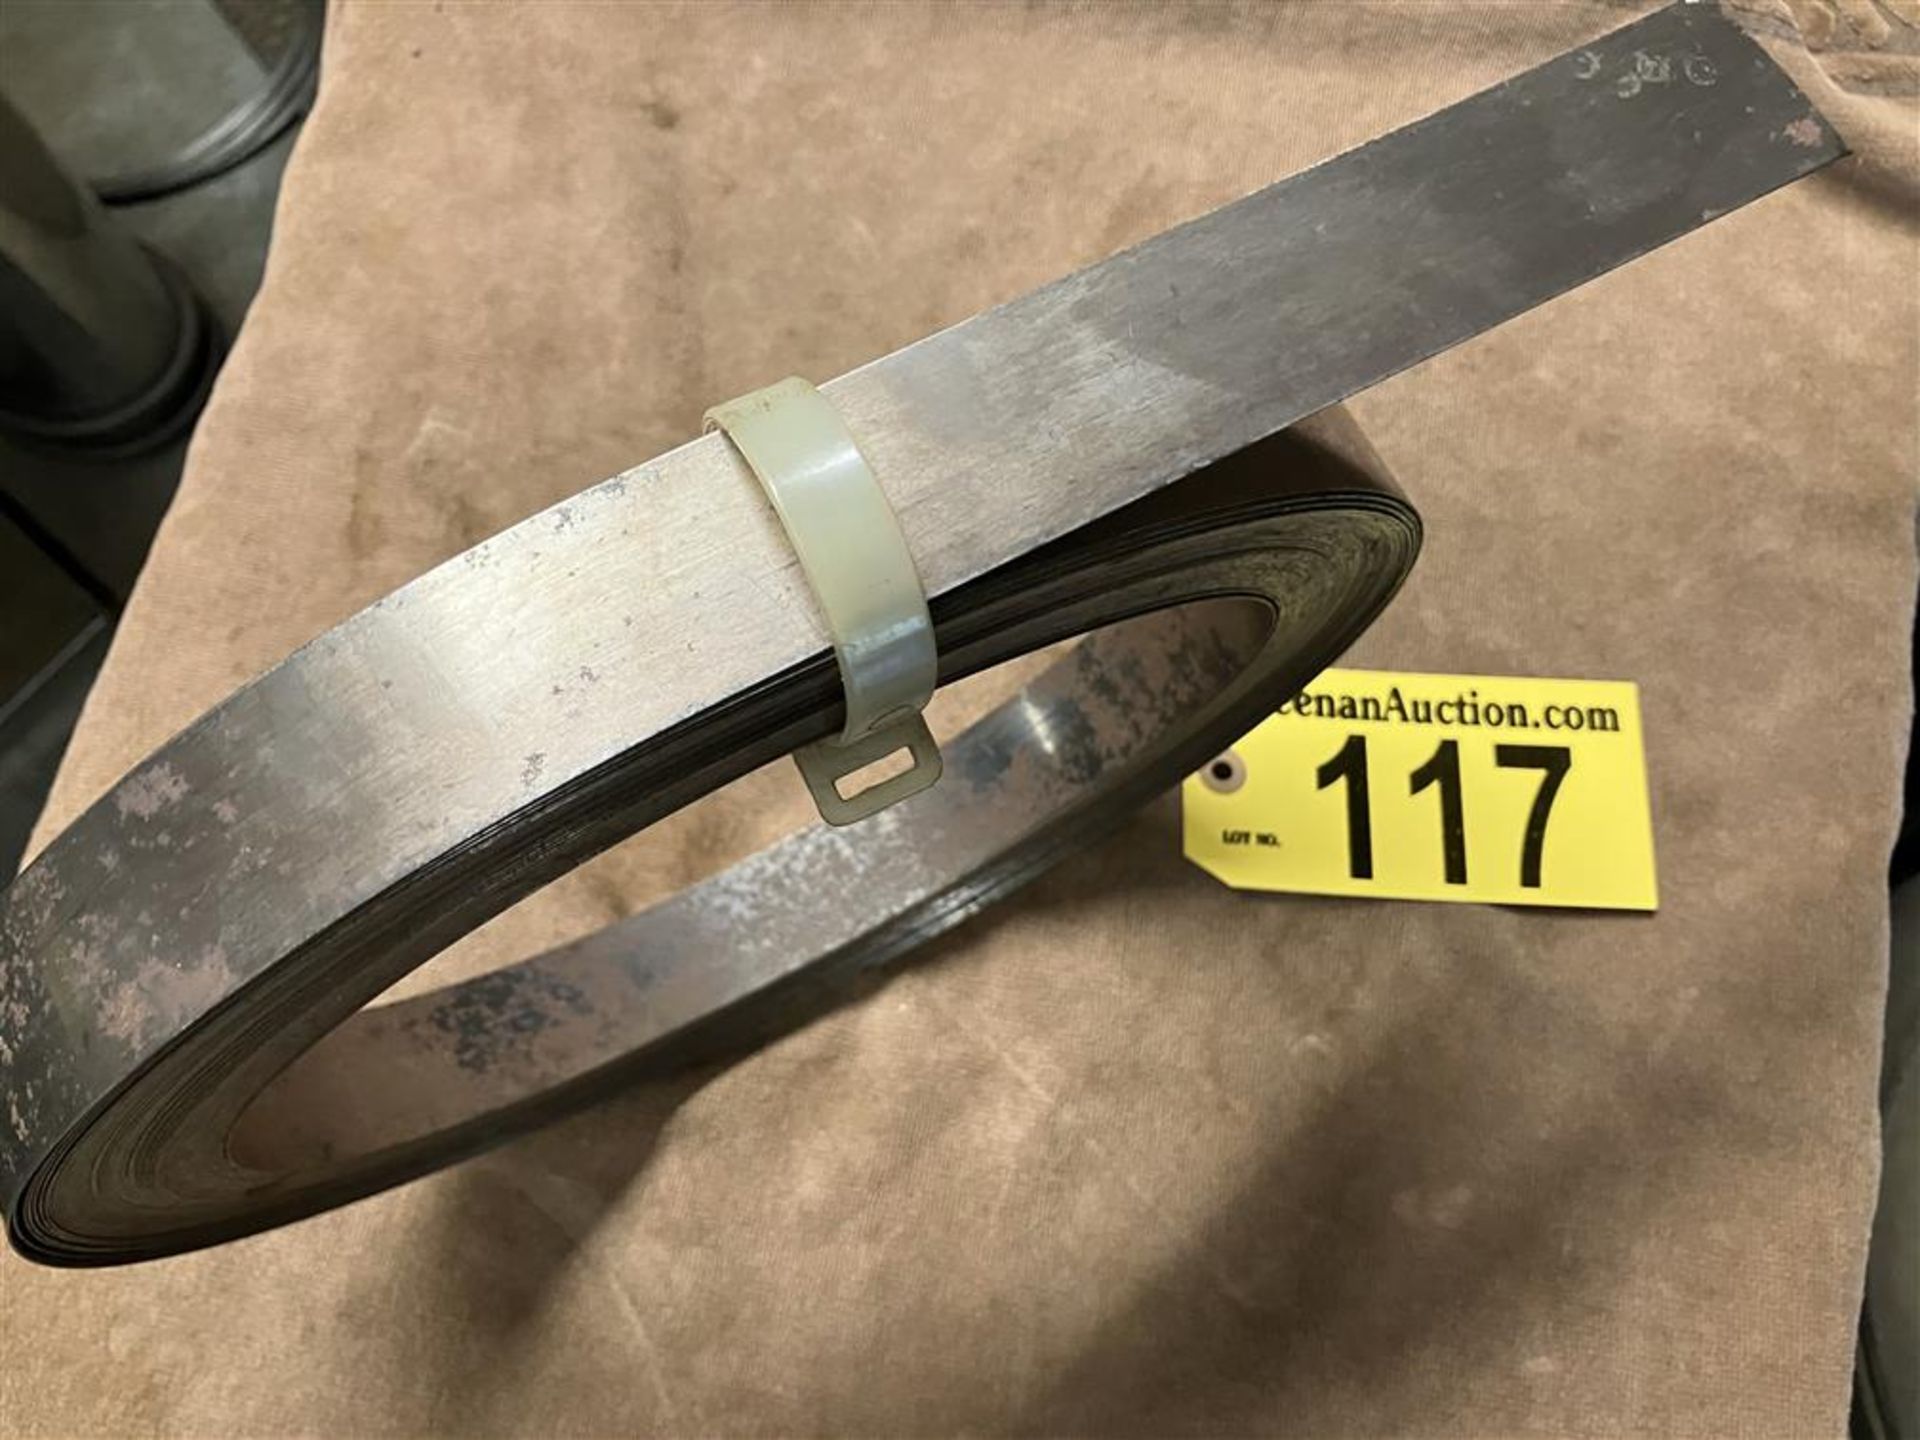 ROLL OF TEMPERED STEEL 1.25”X 0.017” (27 GA) ABOUT 11.5 LBS